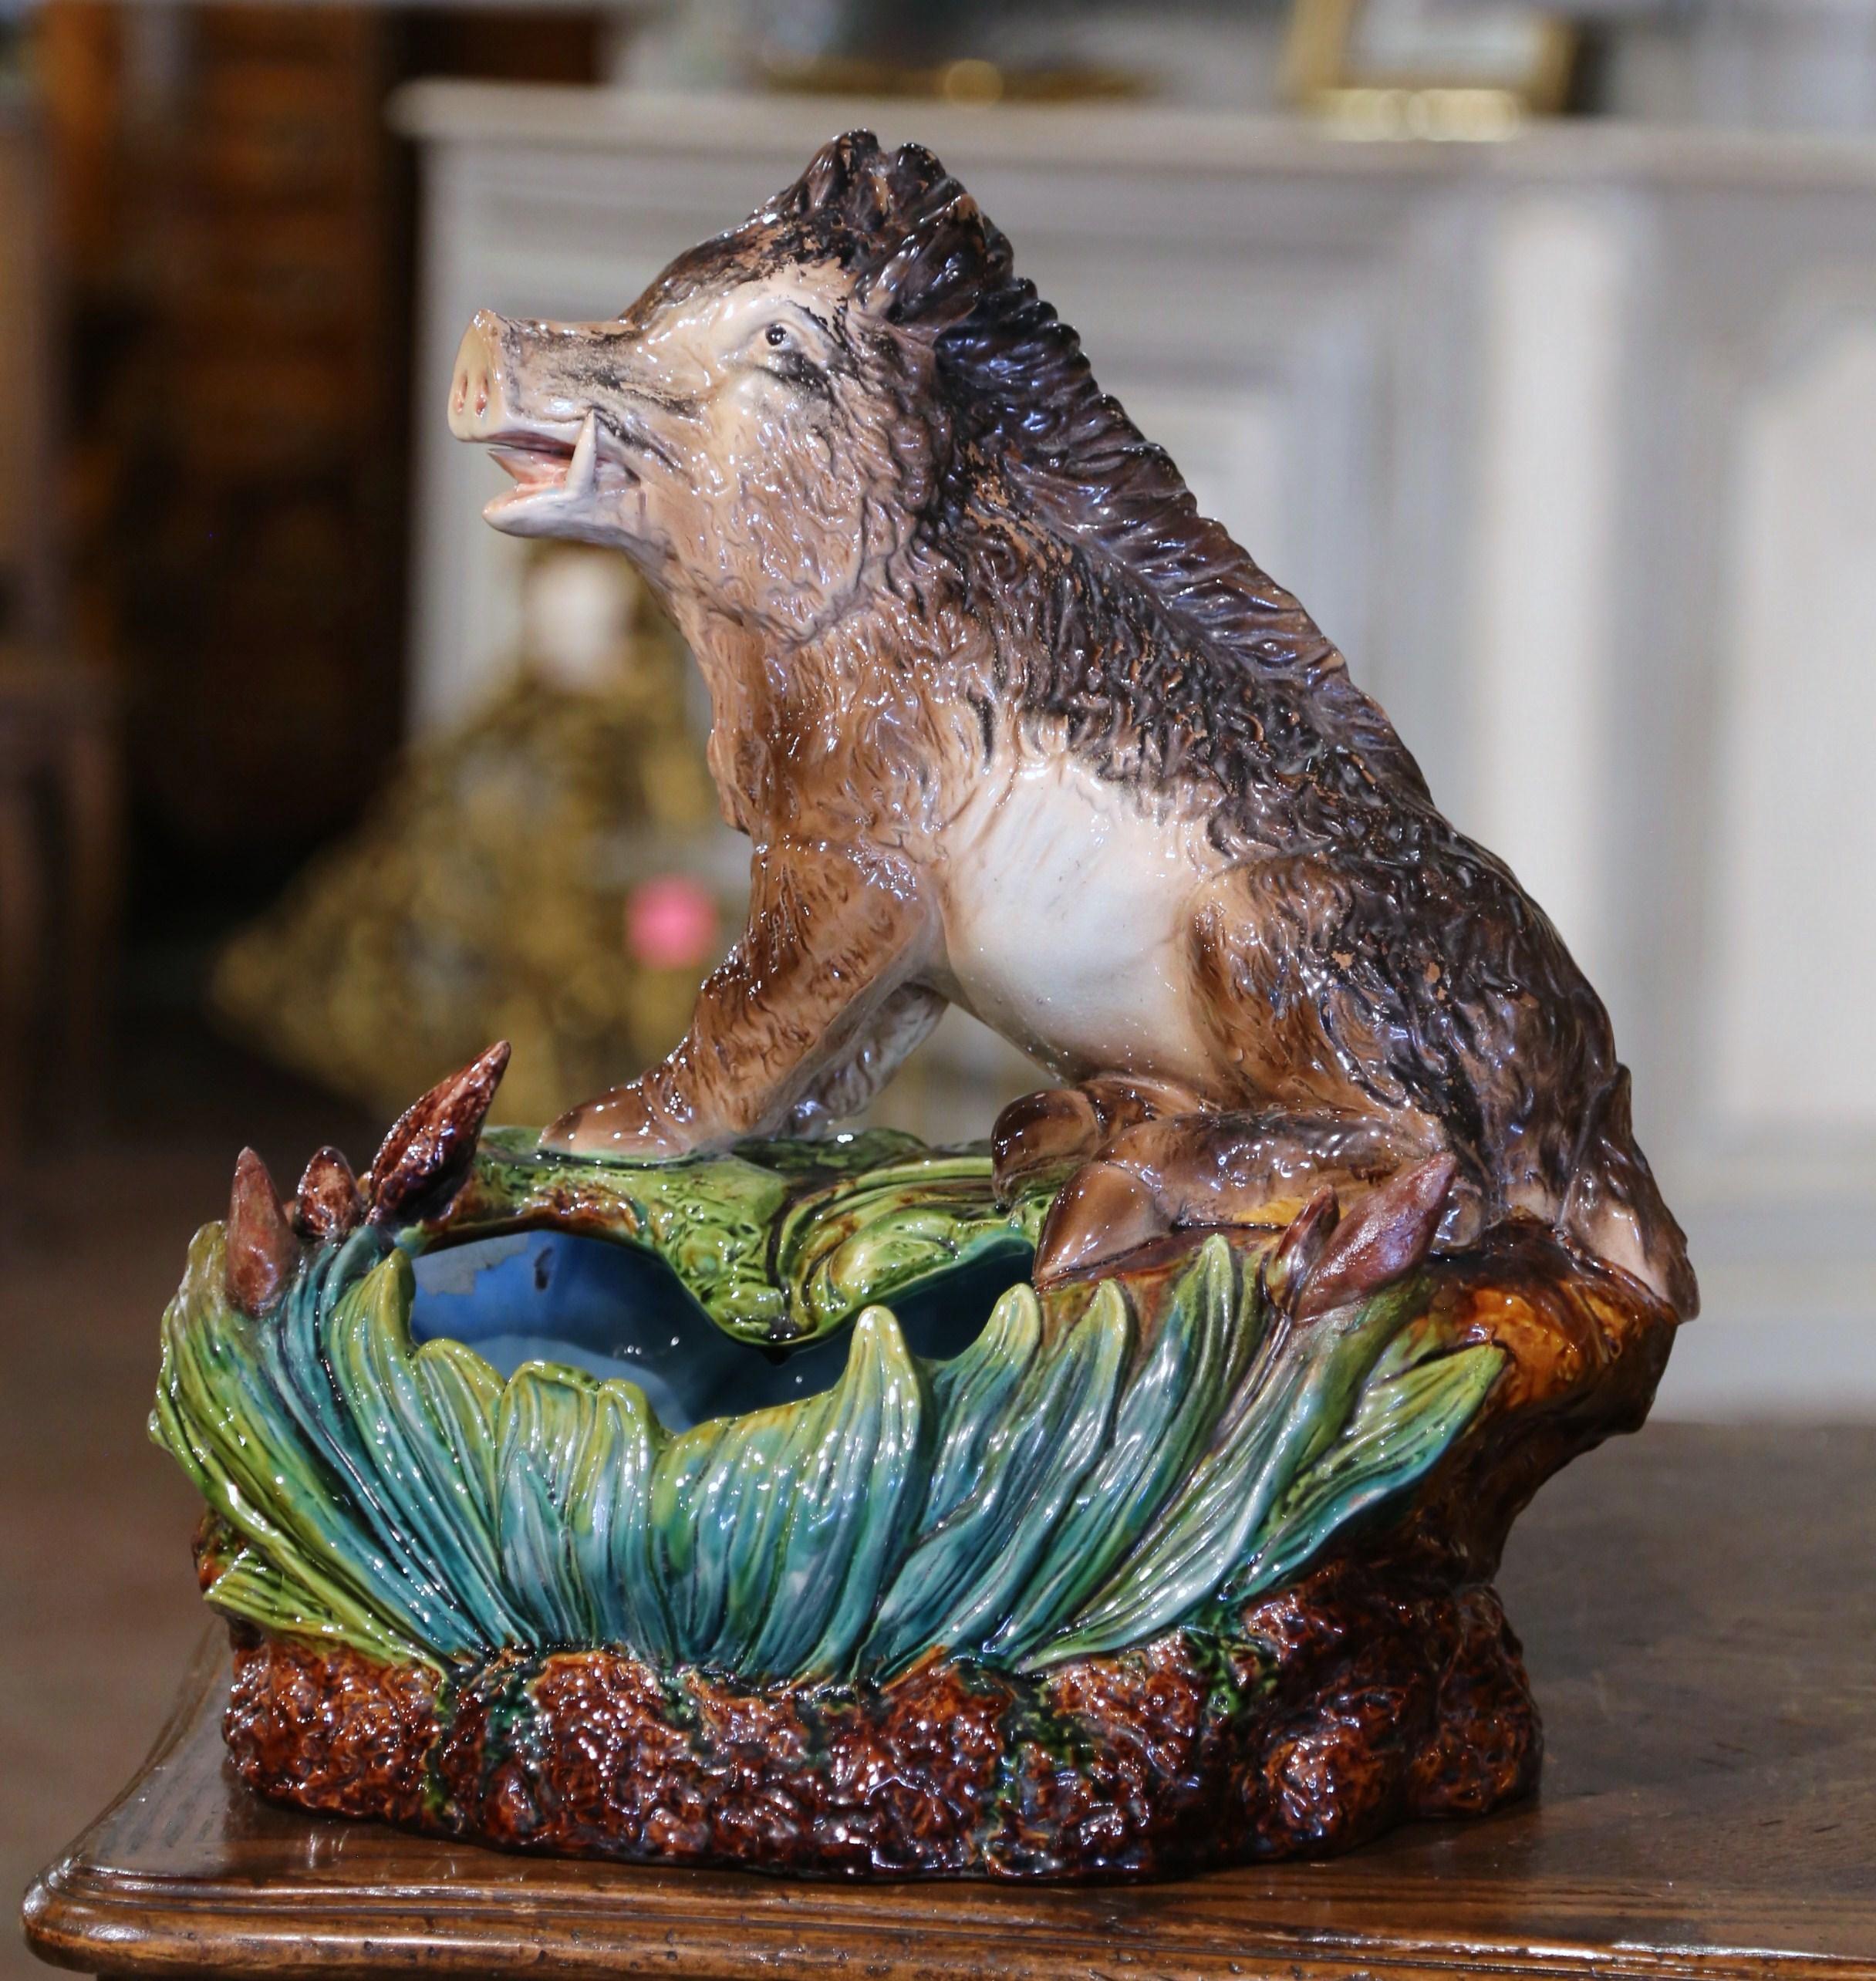 Decorate a table or console with this colorful antique majolica planter. Crafted in France, circa 1920, the large, decorative ceramic composition features a wild boar sited on the edge of a flower pot decorated with reed motifs. The large whimsical